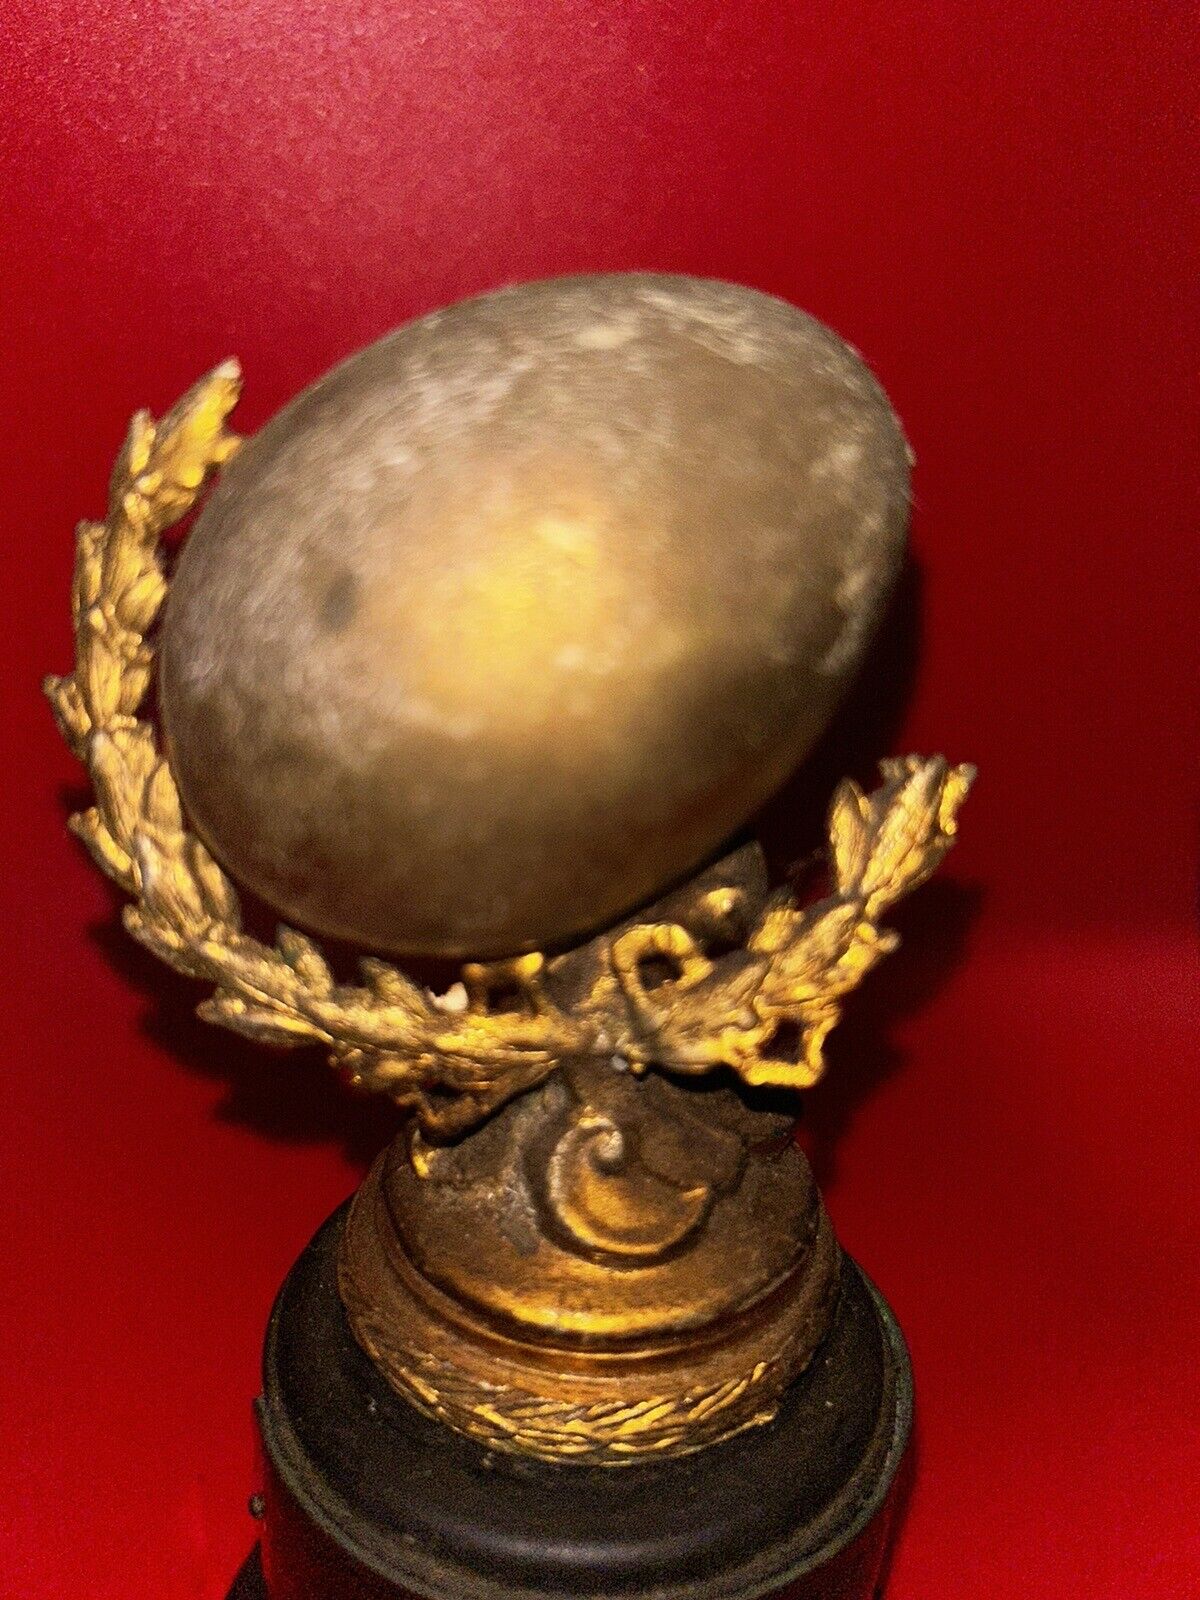 Hy-Line Chicken Egg Trophy. Cast Iron Egg 1940’s ONE OF A KIND. 6 inches